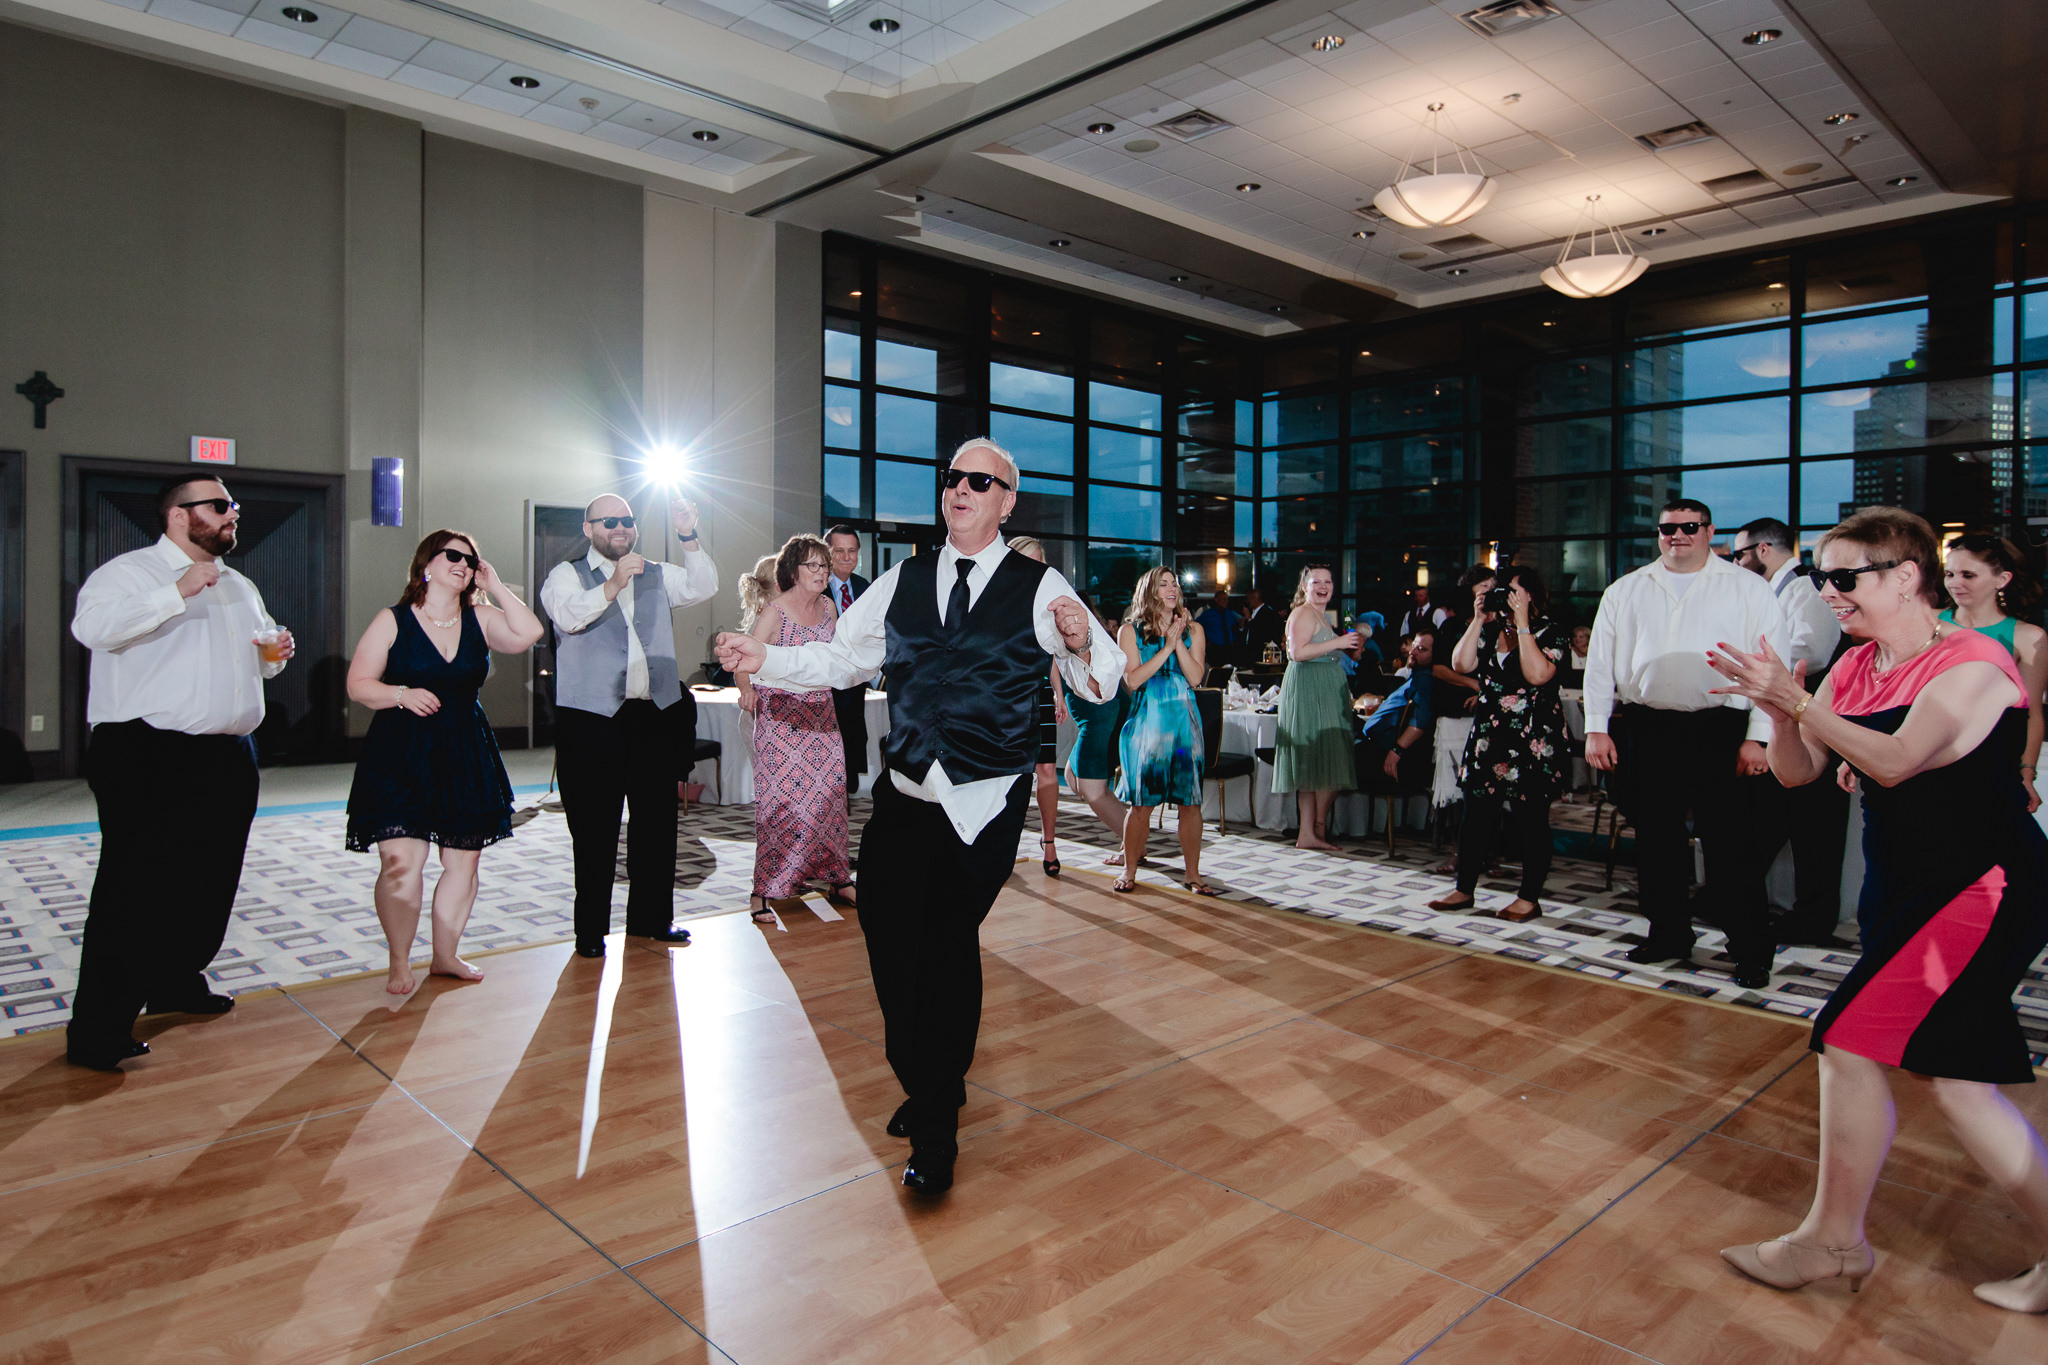 Father of the bride dances in the middle of the dance floor at Duquesne University